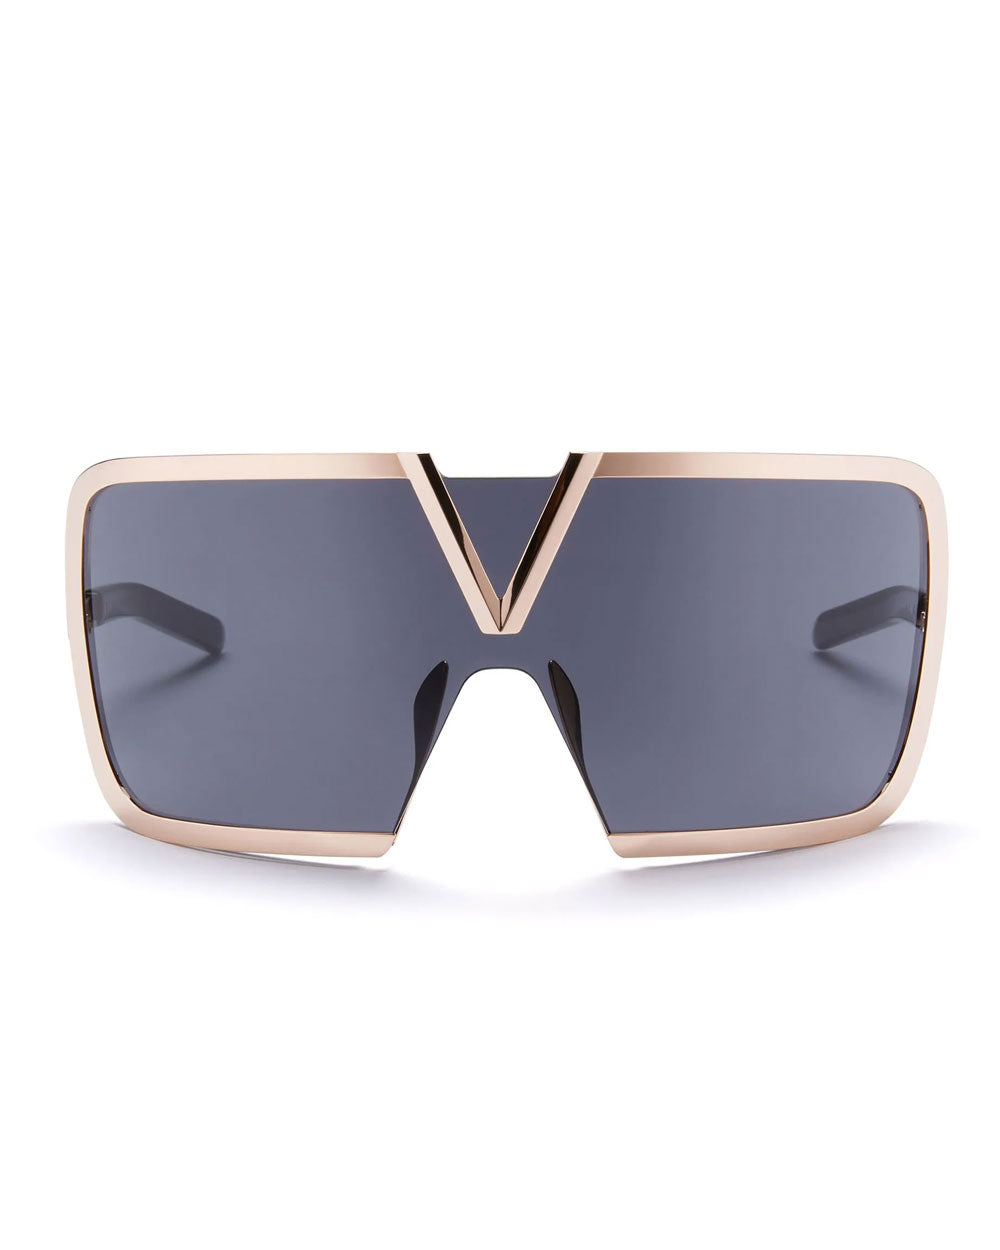 Romask Sunglasses in Black and Rose Gold